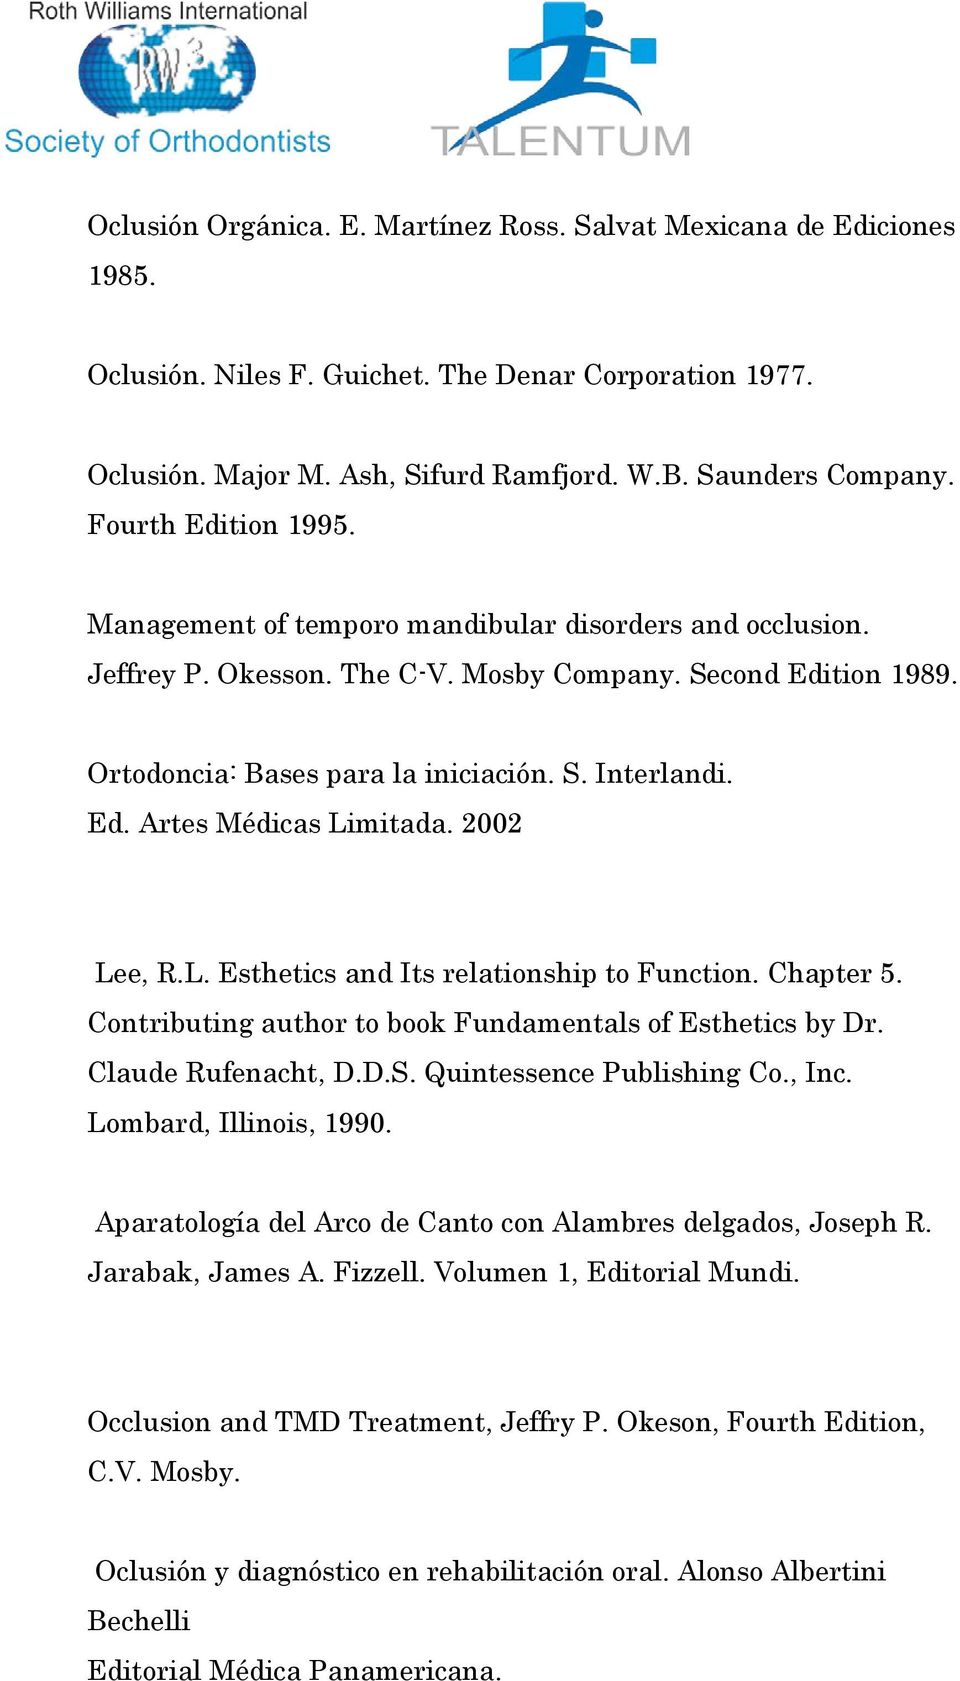 2002 Lee, R.L. Esthetics and Its relationship to Function. Chapter 5. Contributing author to book Fundamentals of Esthetics by Dr. Claude Rufenacht, D.D.S. Quintessence Publishing Co., Inc.